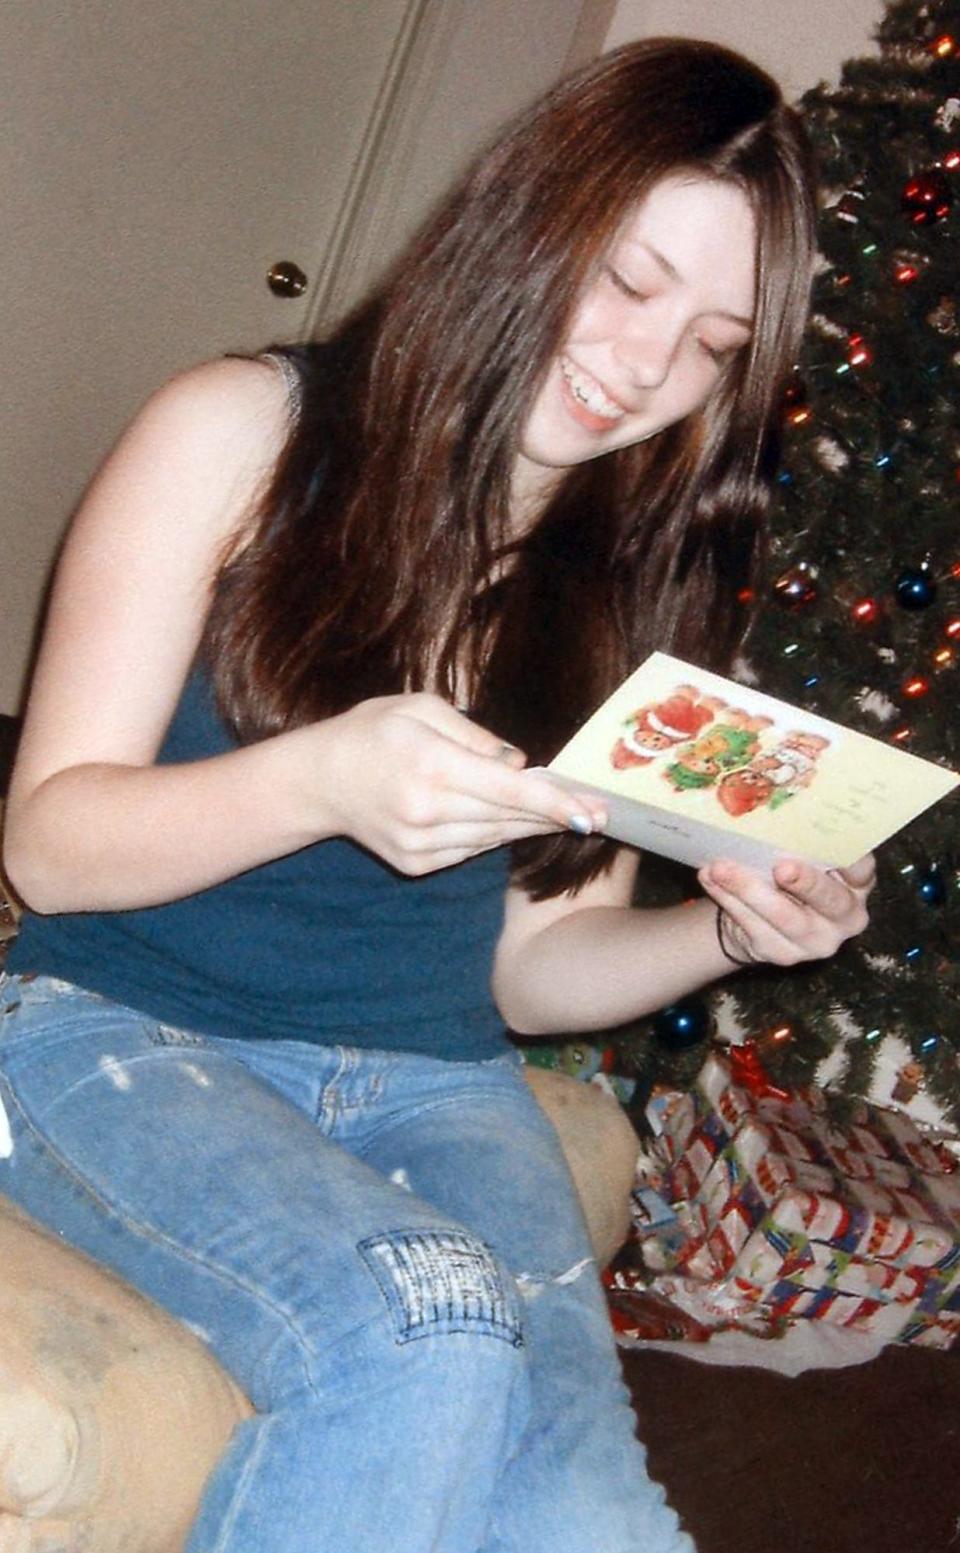 Photo courtesy of Elizabeth Crecente....Jennifer Crecente is shown at a Christmas party in 2005.  She was murdered in February when she was 18.  Her mother, Elizabeth, hopes to preserve the memory of her only daughter by starting Jennifer's Hope, a non-profit partnership with SafePlace to reach out to young victims of dating violence.  She says creating the organization is her way of coping with her grief and fighting to make her life meaningful.